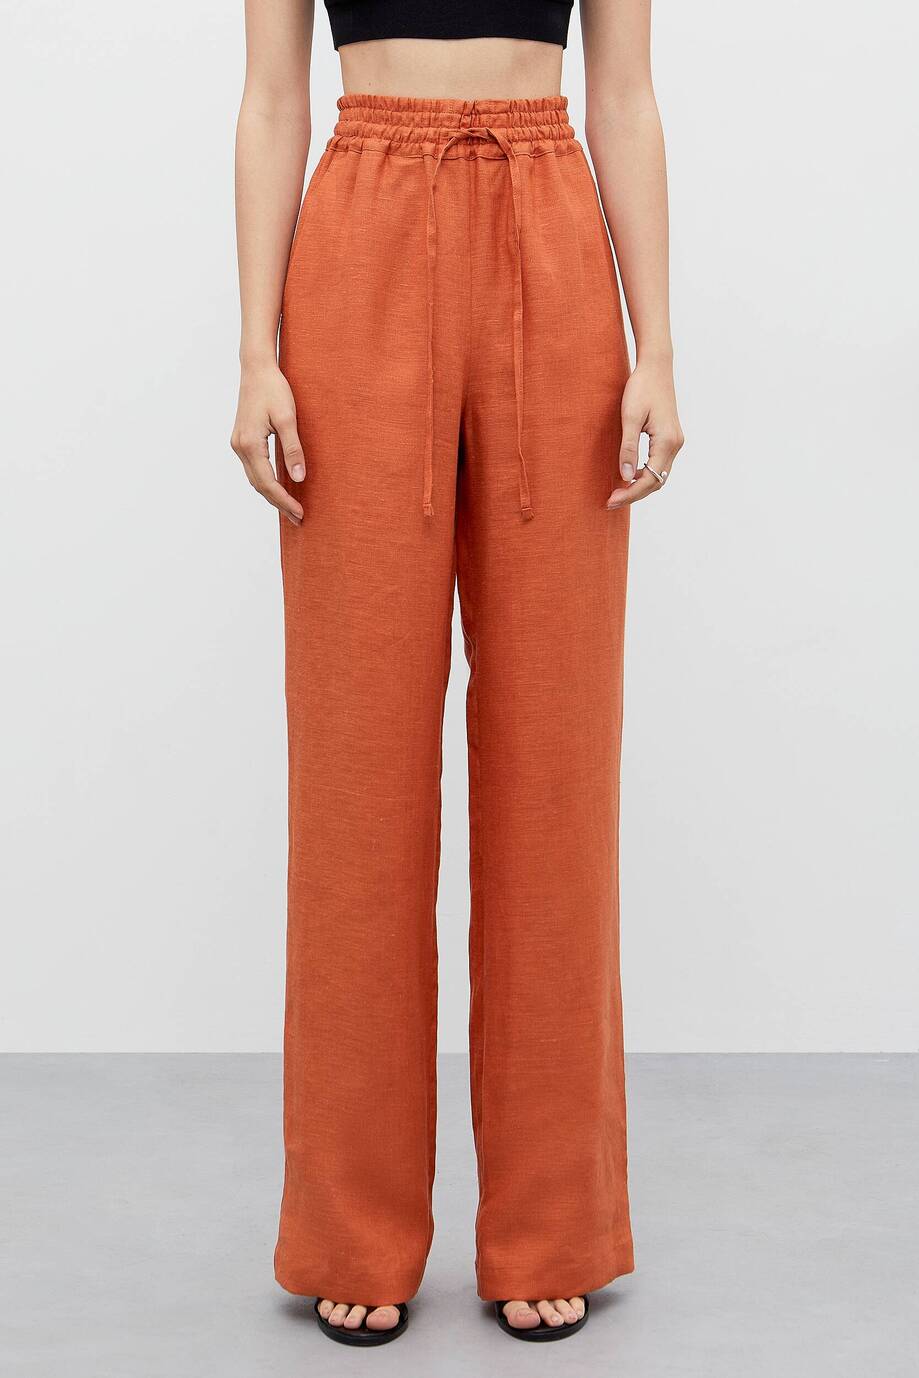 Loose-fitting trousers made of linen